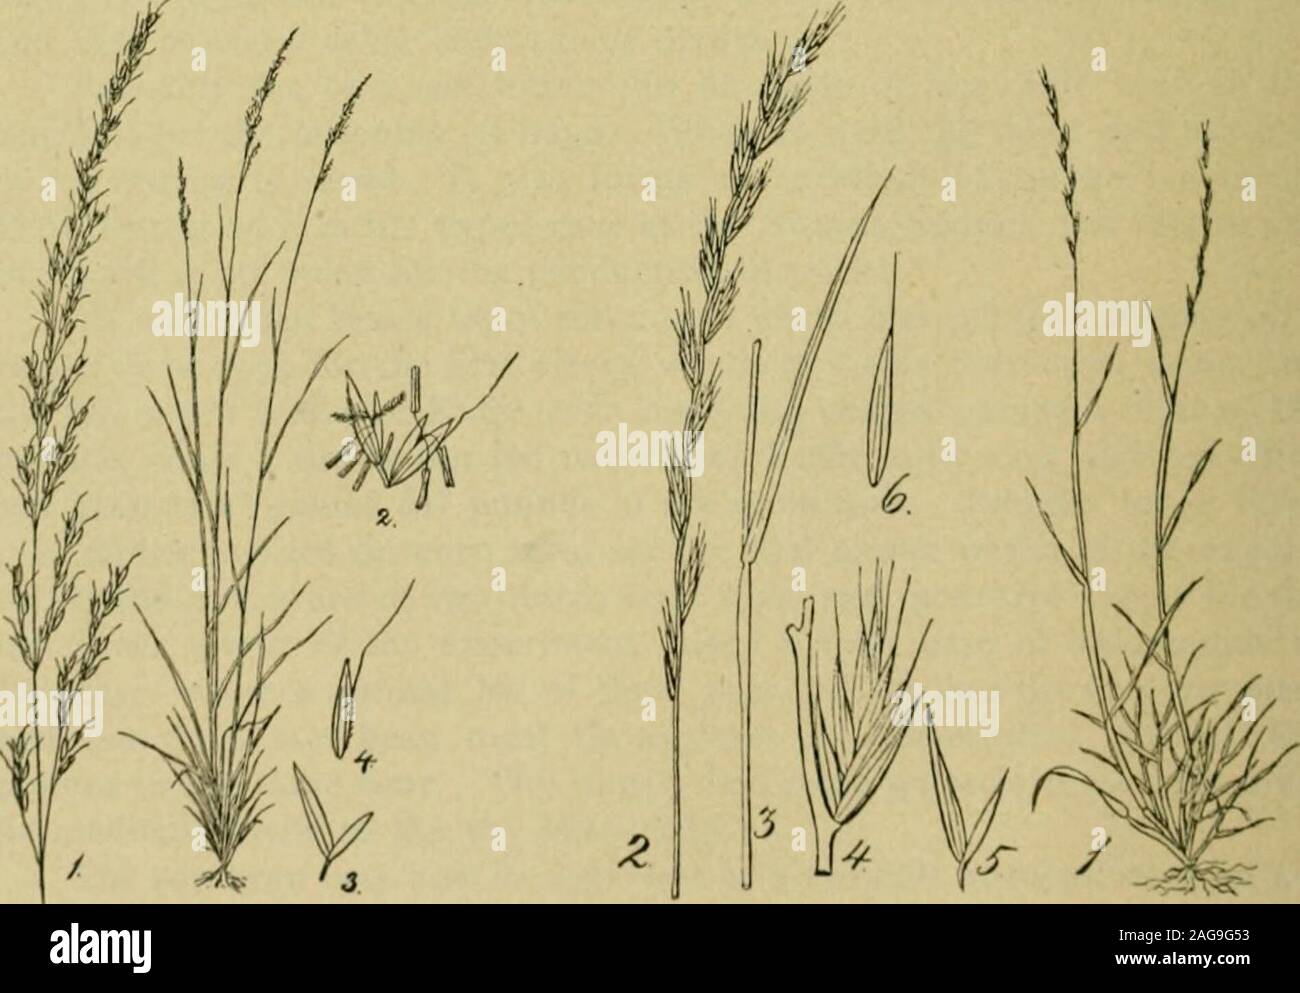 . Grasses and forage plants, by J.B. Killebrew. Herds Grass—Agroslis a I ha. Timothy—Phhuni piv/fiis,-. Tall Mfadoiv Fescue—Frstiica elatior.. Meadow Oat Grass—Anlinuitlinavenareuni. /firuma! Alr (,iass/.(&gt;/ium f&gt;fr,nne. Imvk ImIOKTANT Mkadow Grassks. PART HI.MEAD0W5 AND THEIR MANAGEMENT. Upon the proper selection of soils and situations for meadows willdepend largely their permanency and their productiveness. The soil, itscondition and situation are the most important elements of success.Above all things the soil must be fertile, or it should be made so by abund-ant fertilization. Poor Stock Photo